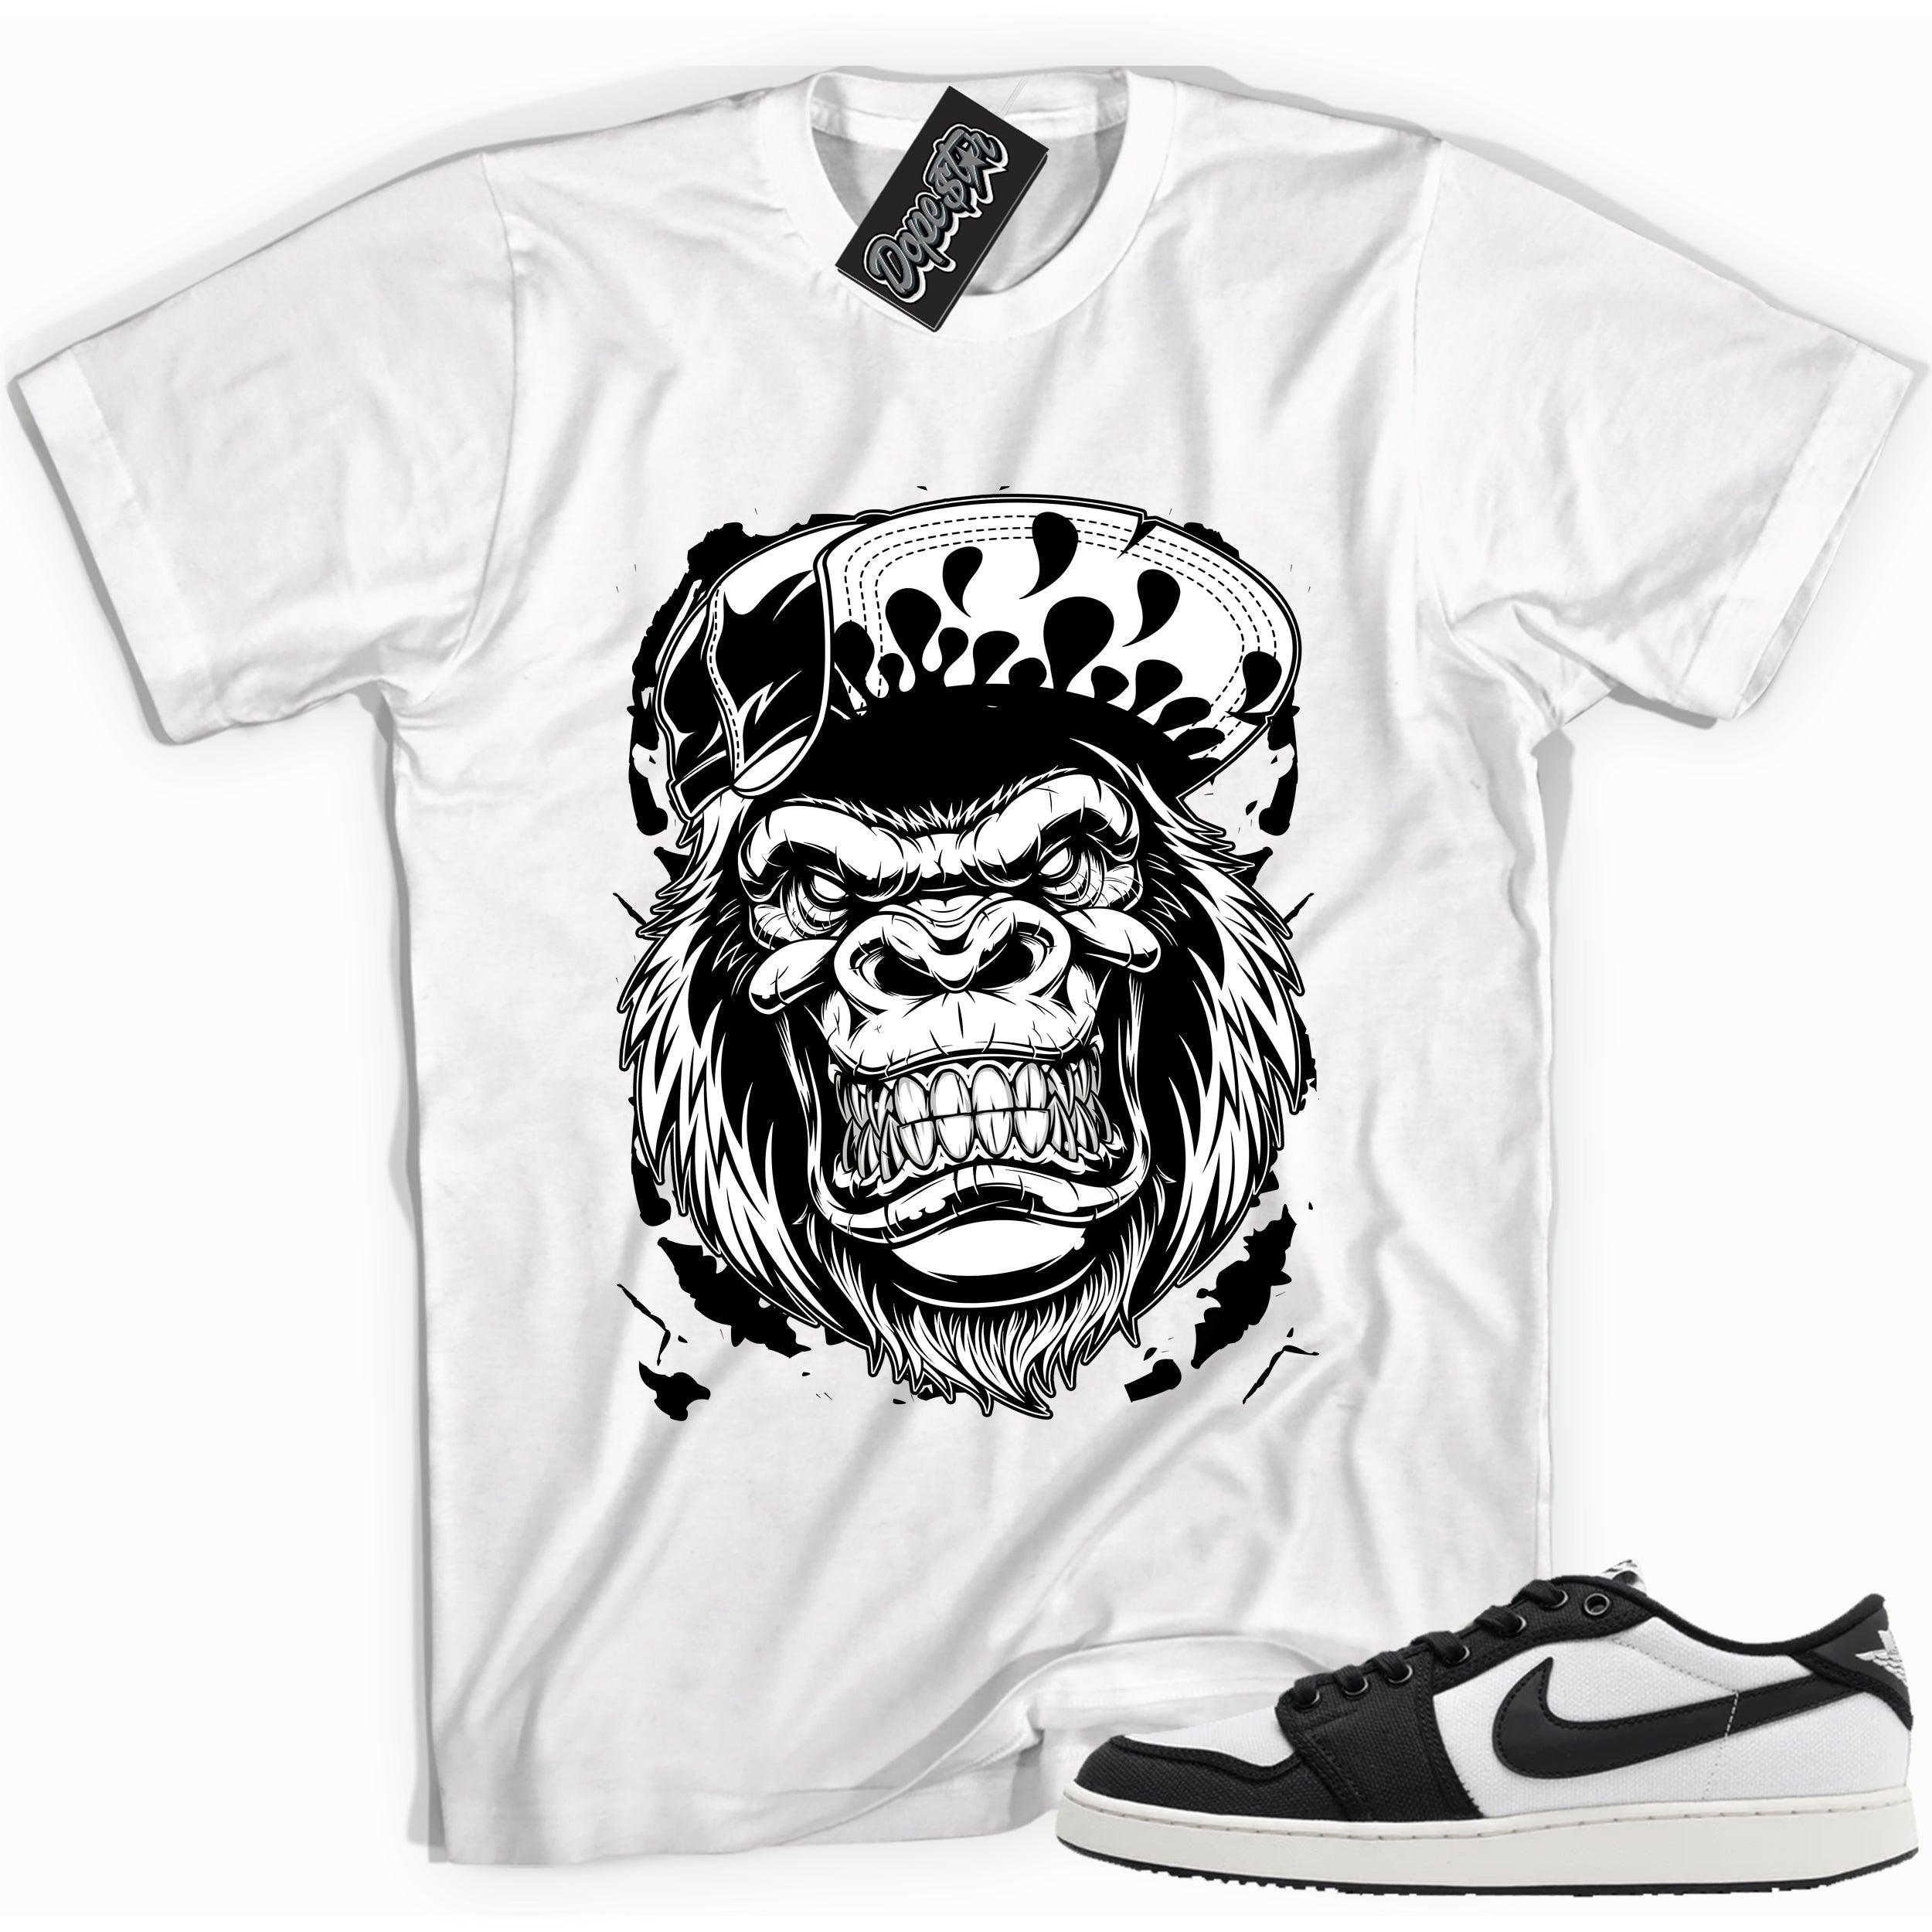 Cool white graphic tee with 'gorilla beast' print, that perfectly matches Air Jordan 1 Retro Ajko Low Black & White sneakers.